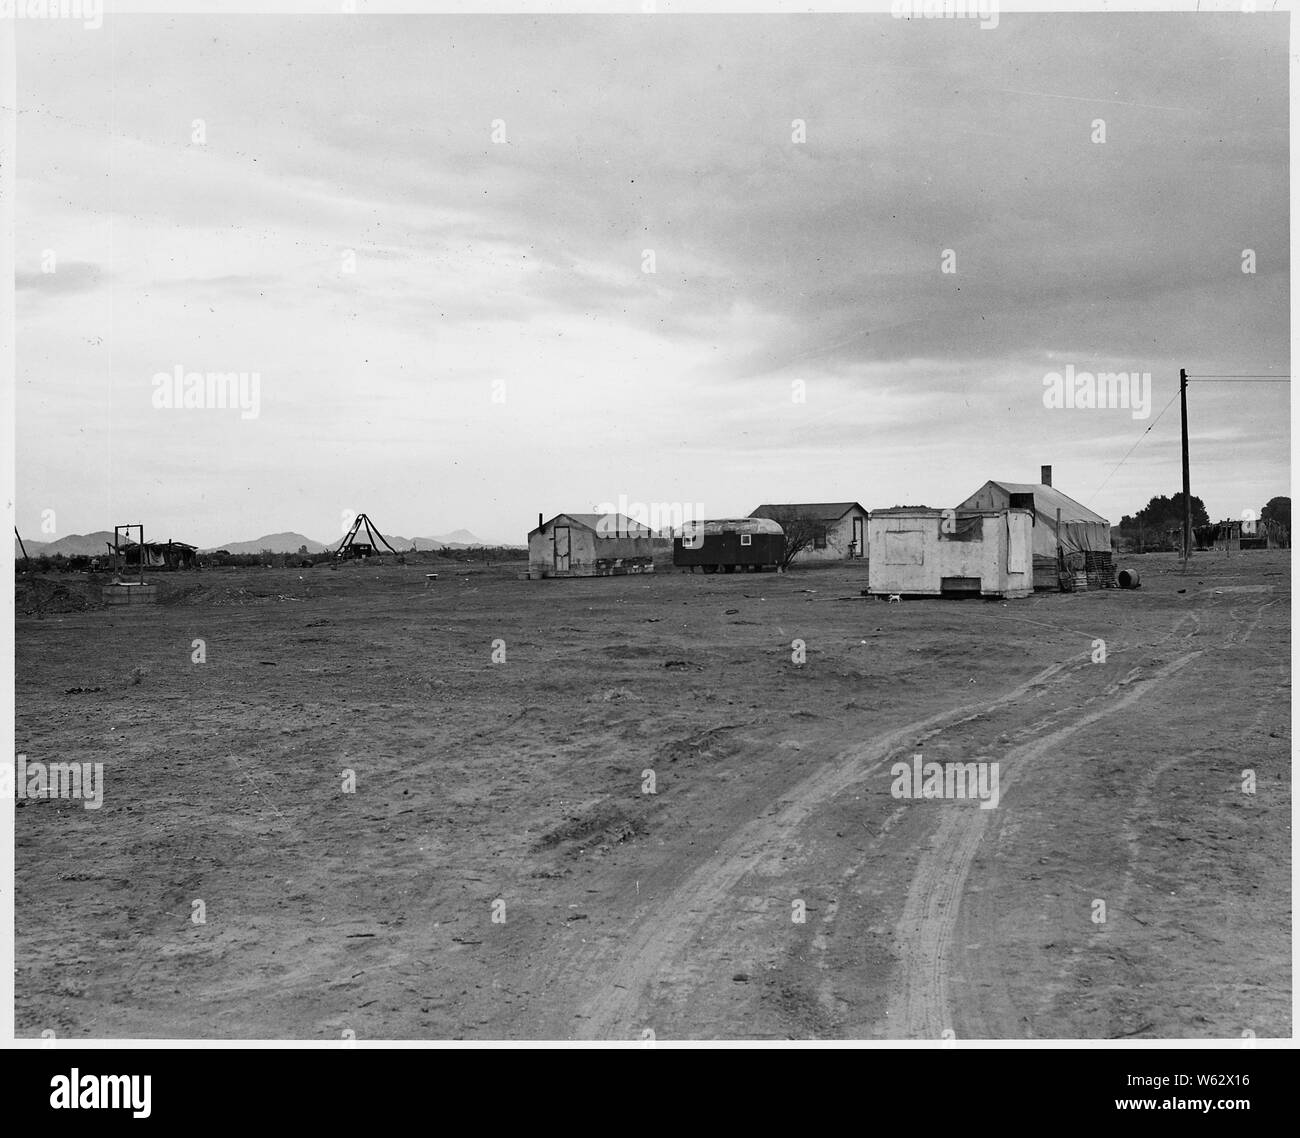 Cashion, Maricopa County, Arizona. Self-resettlement by Southwestern whites on 100 acre subdivision. . . .; Scope and content:  Full caption reads as follows: Cashion, Maricopa County, Arizona. Self-resettlement by Southwestern whites on 100 acre subdivision. Water from well dug by hand, with rope and bucket hoists. Terms $50 down. Stock Photo